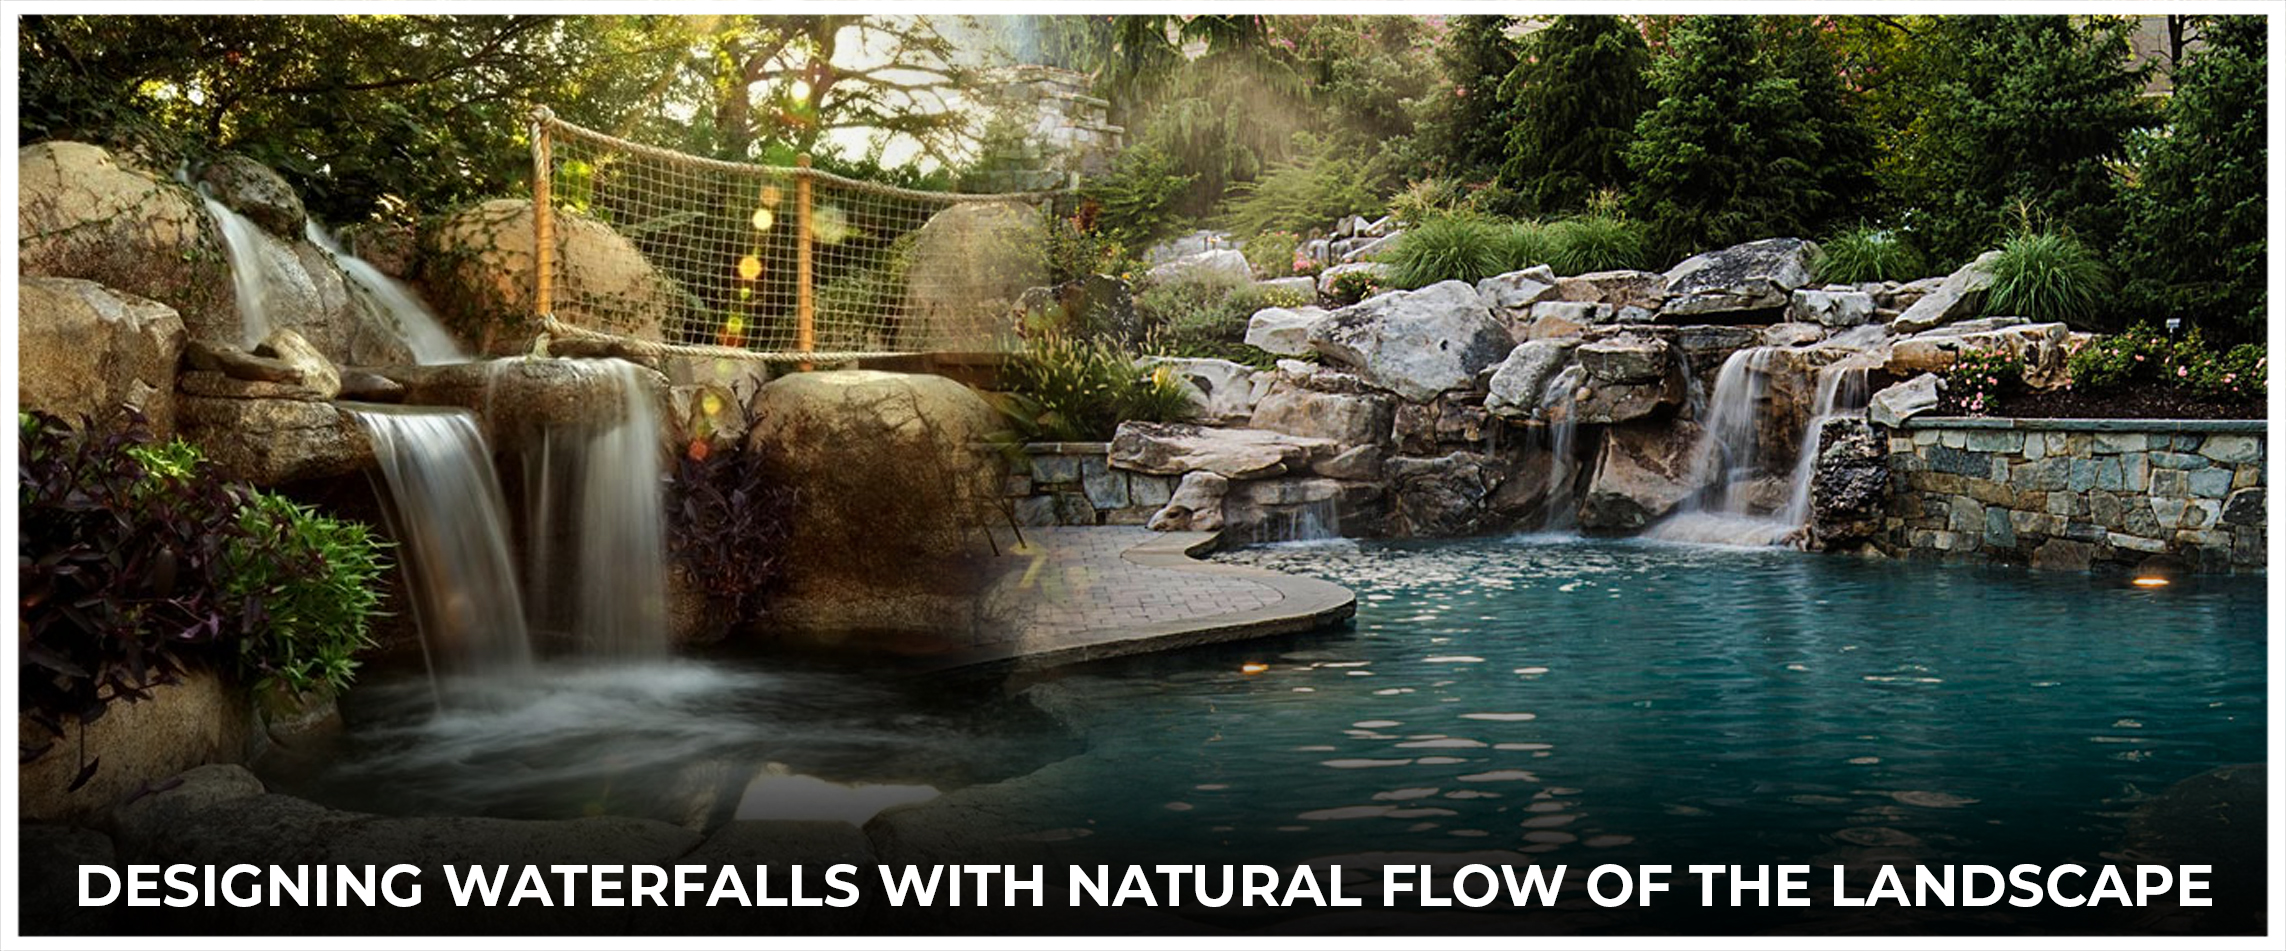  Designing Waterfalls with Natural Flow of the Landscape